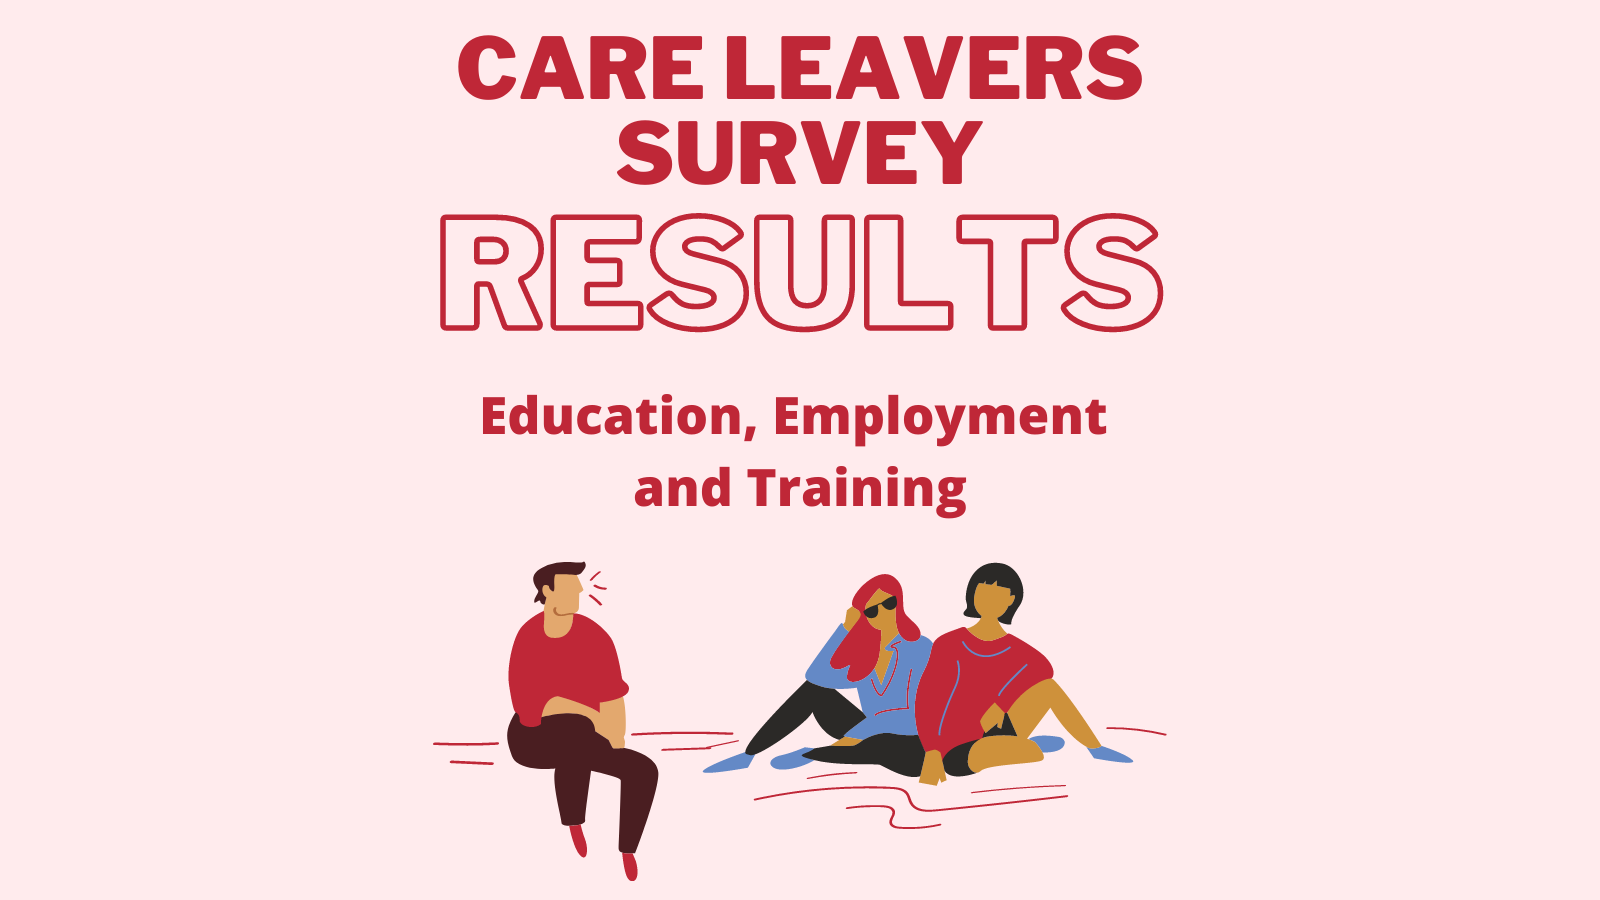 an illustration of three people talking. The image is to promote the results of the care leavers survey about education, employment and training